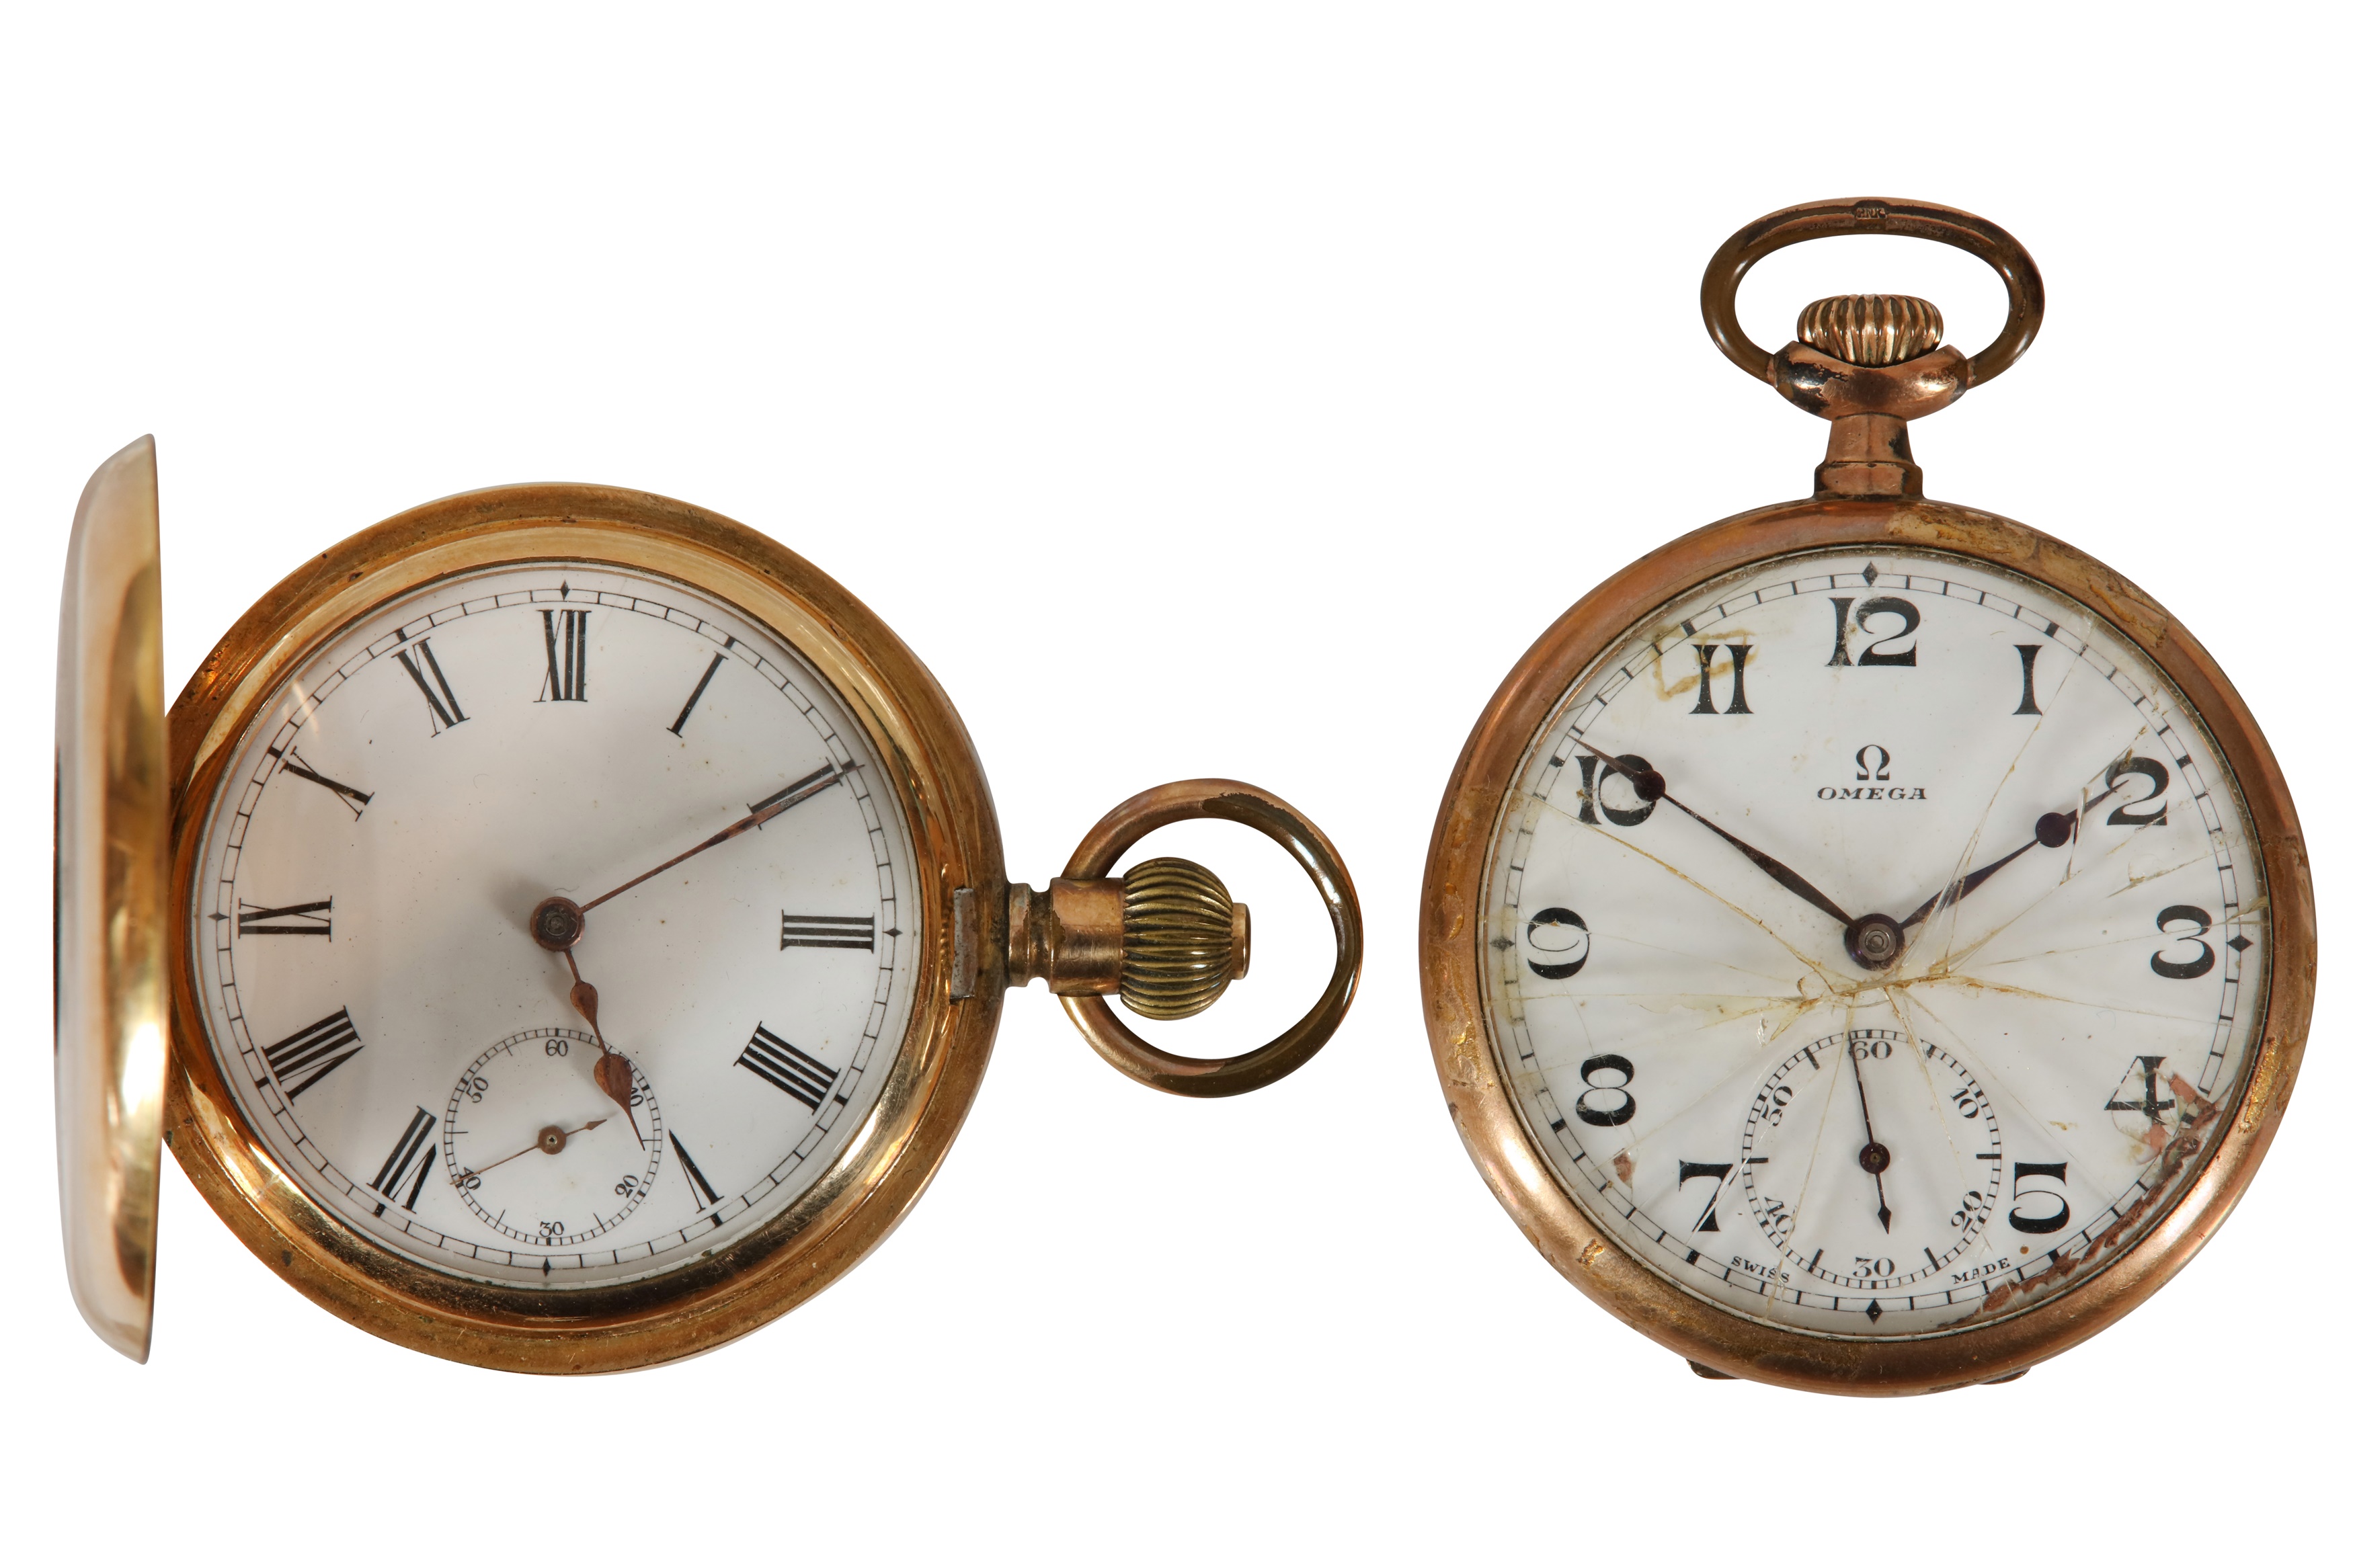 TWO POCKET WATCHES